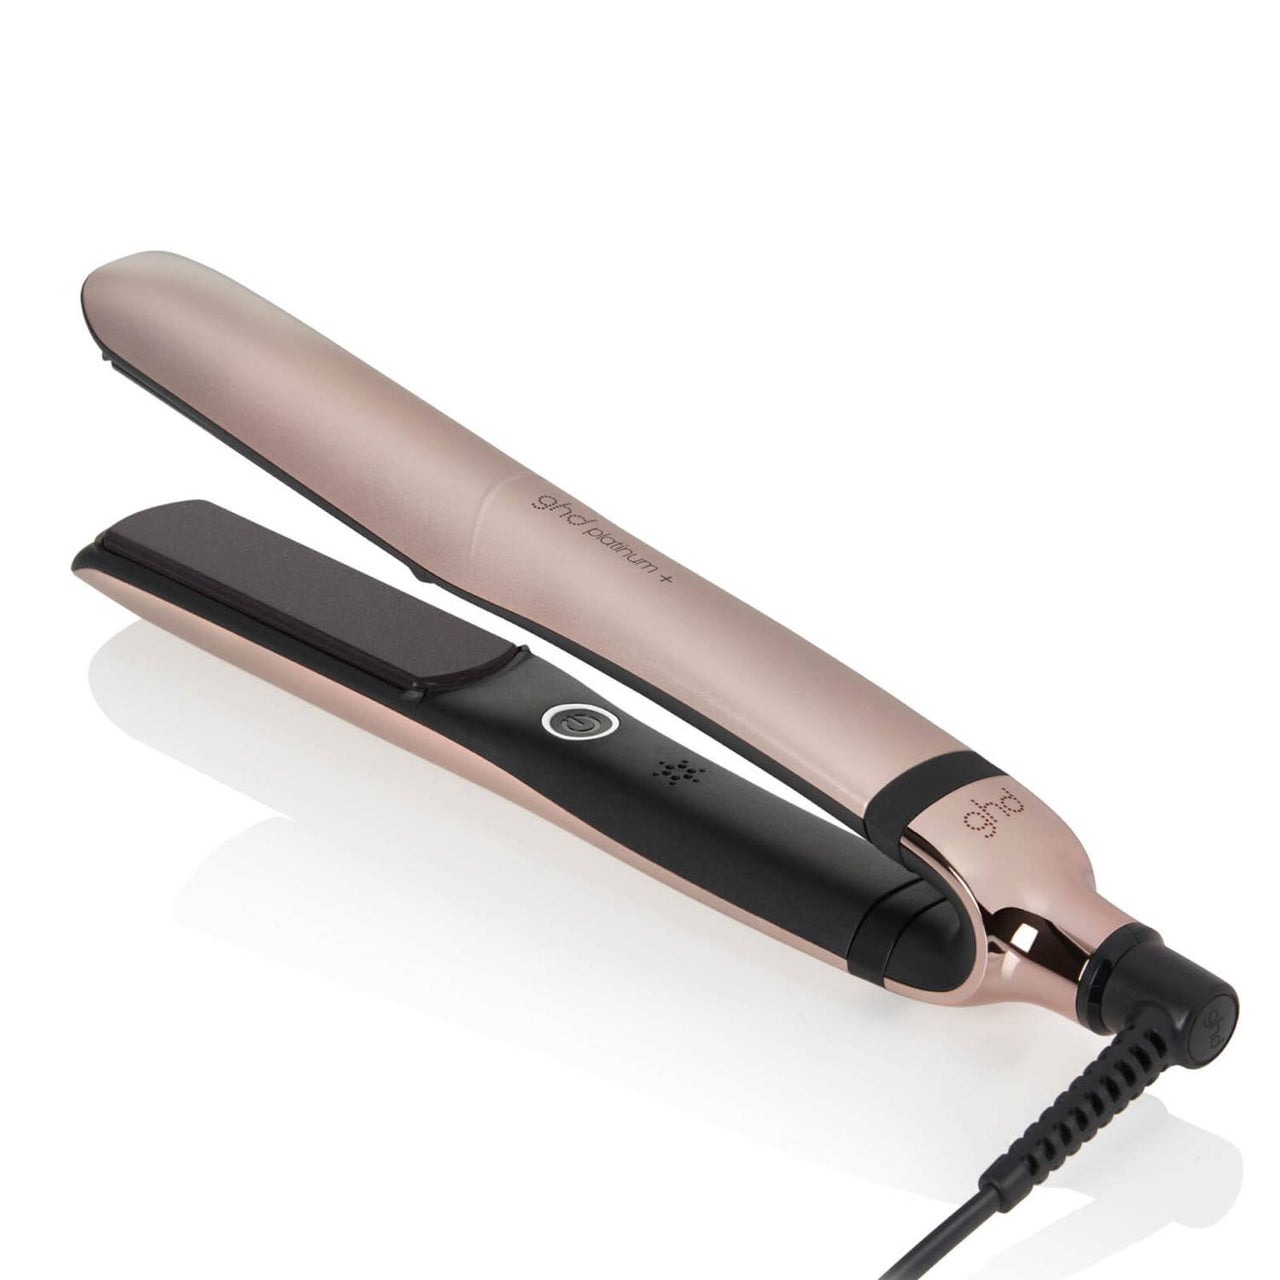 ghd platinum+ in sun-kissed taupe